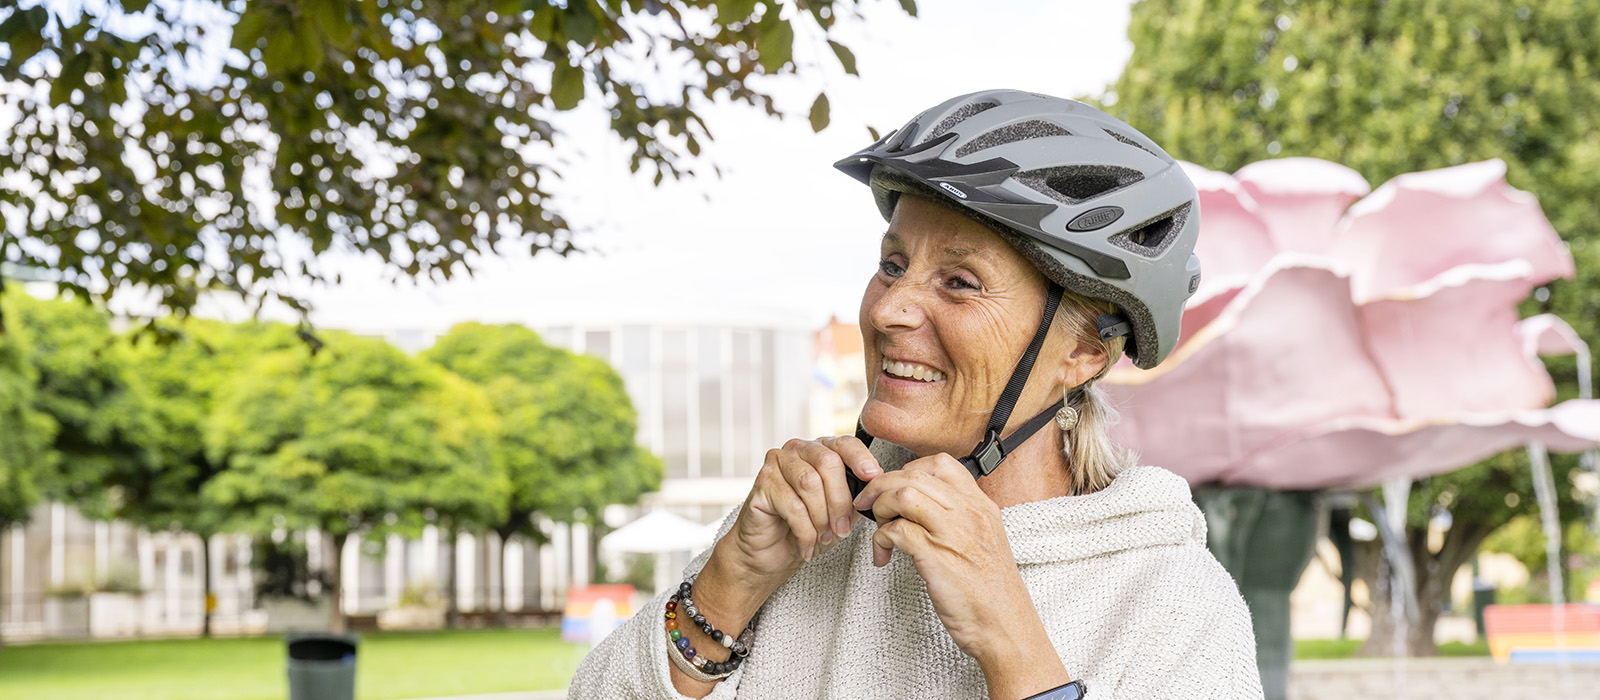 A woman in a grey jumper is putting on a black bicycle helmet. There are green trees in the background.